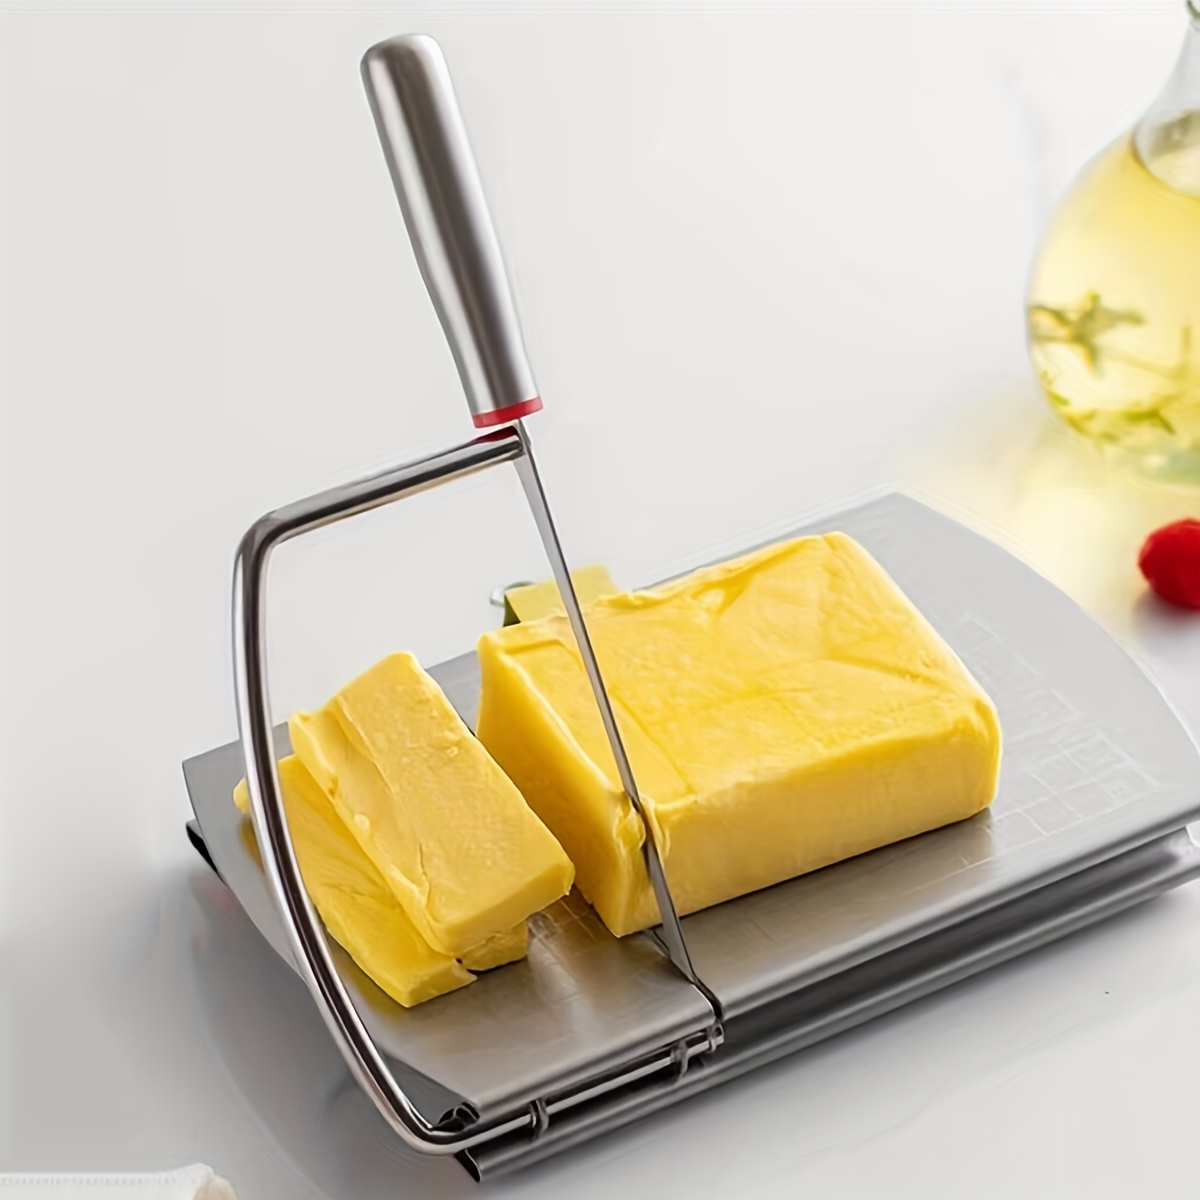 Butter Slicer Cutter Stainless … curated on LTK